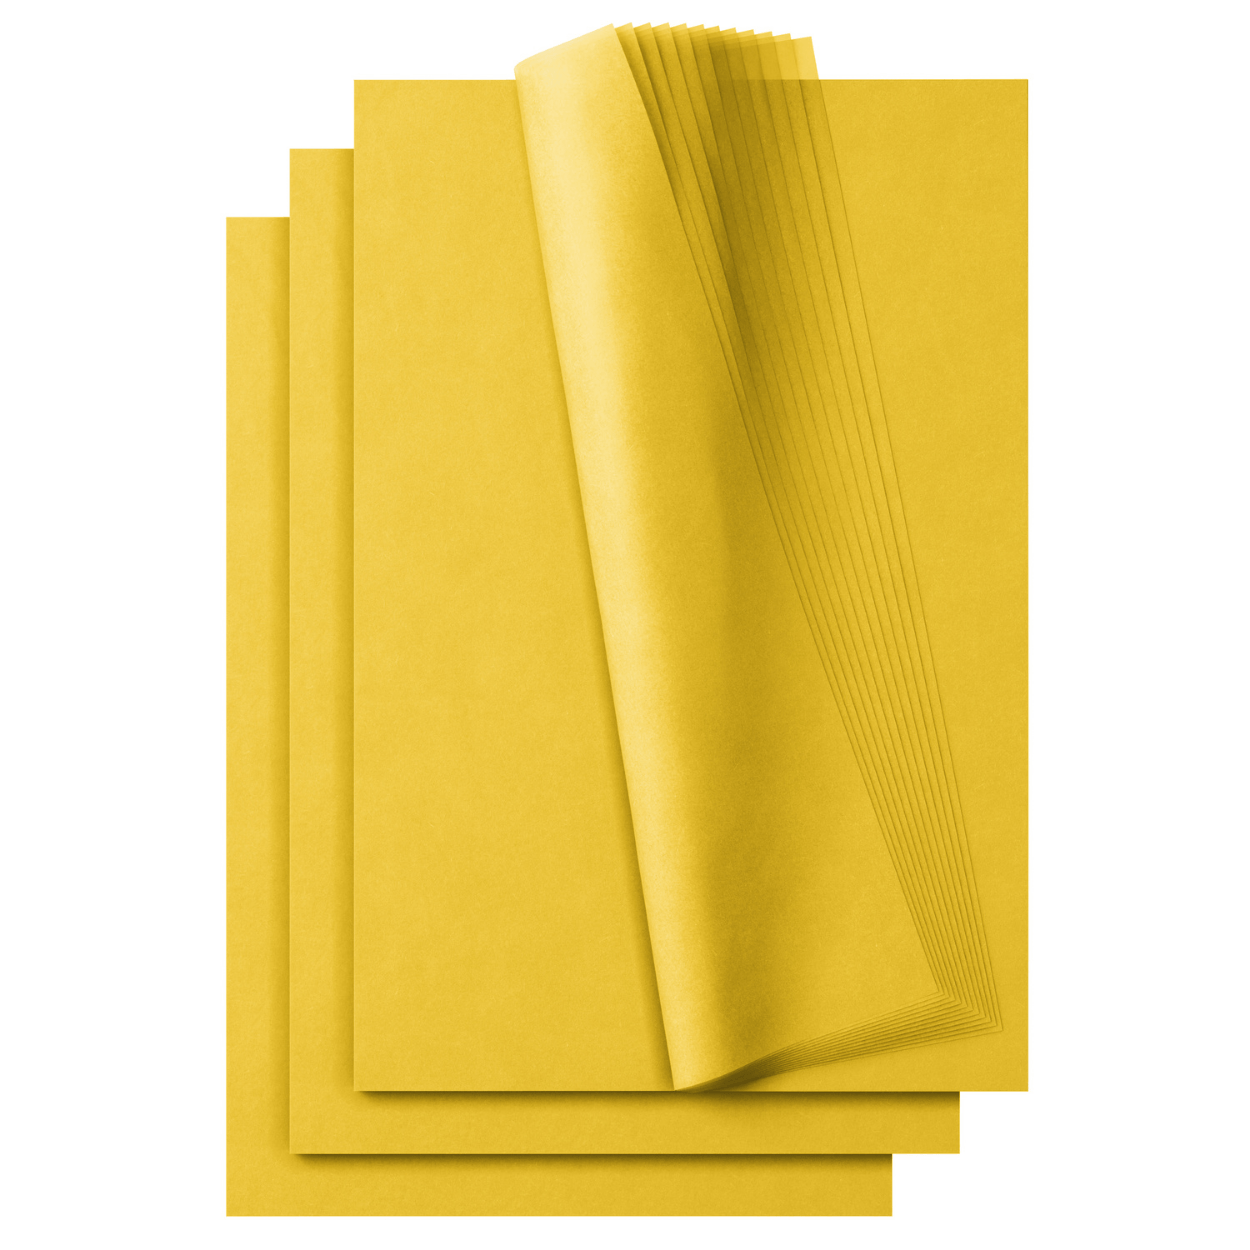 Case of Yellow Tissue Paper - 15x20